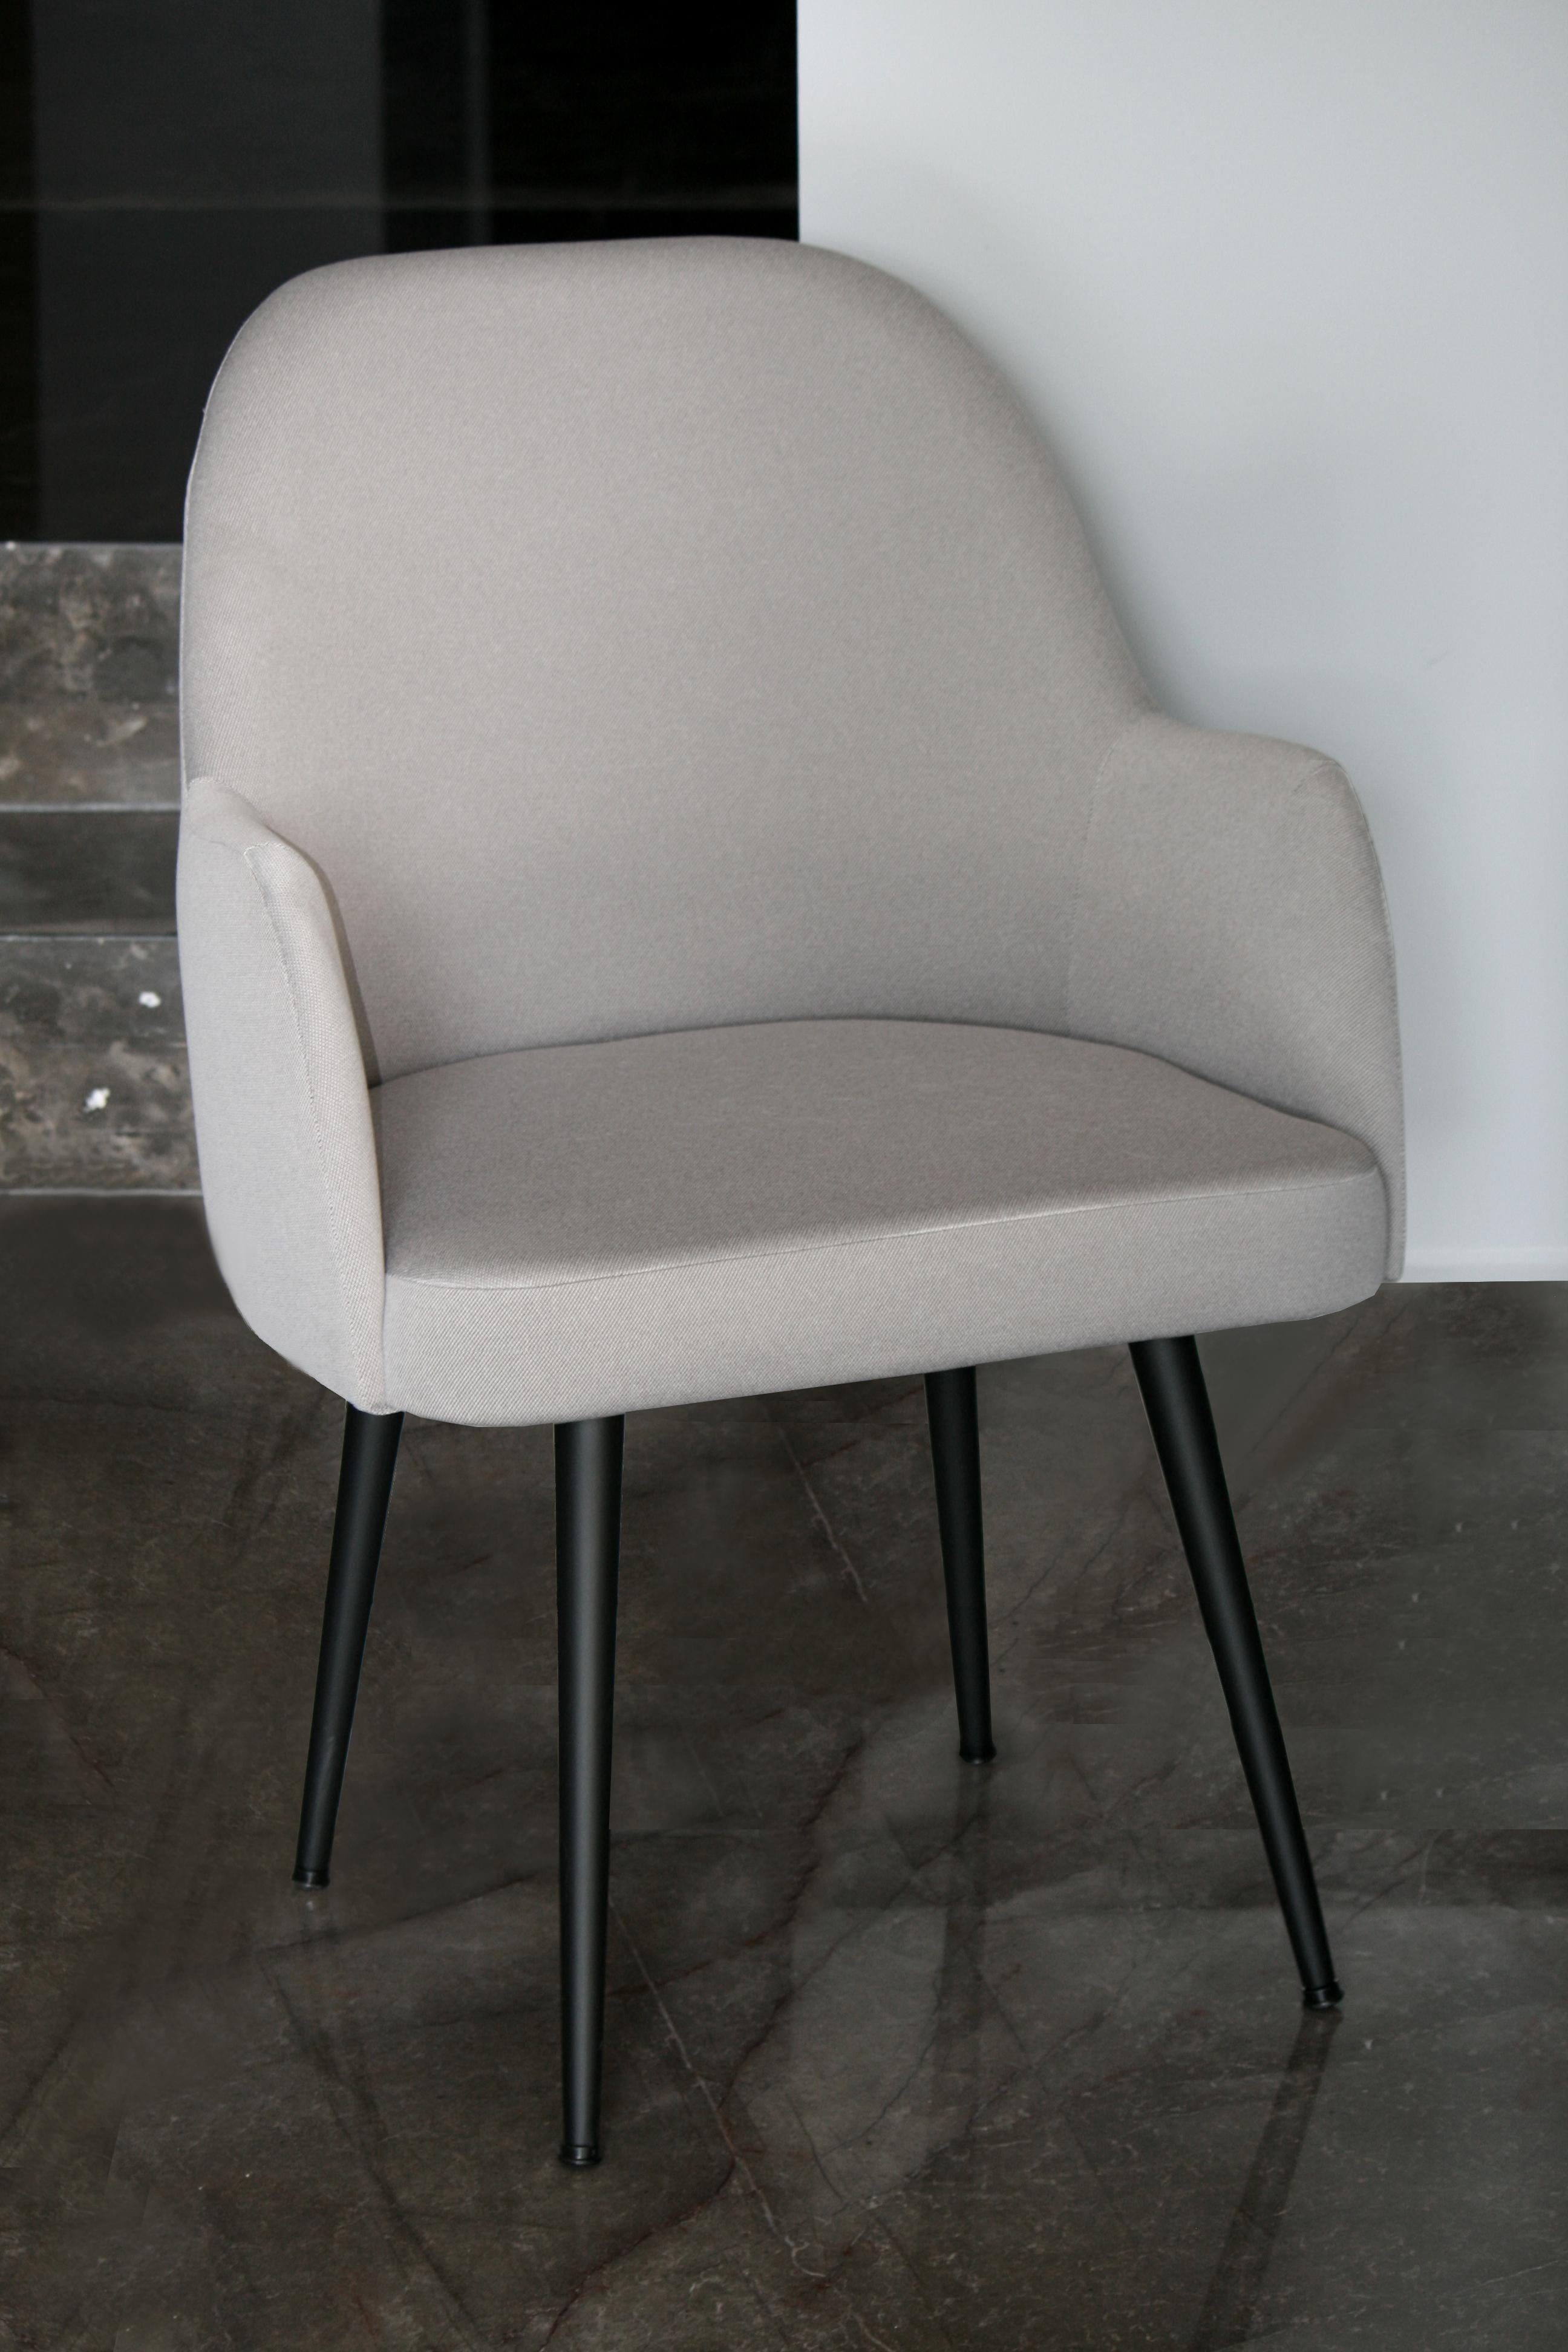 Helsinki collection. Helsinki armchair: simple, elegant, comfortable. Available in steel base electrostatically painted, may be upholstered with variety of fabrics and colors. Also available as a chair and stool. 

Our clients´ favorite collection